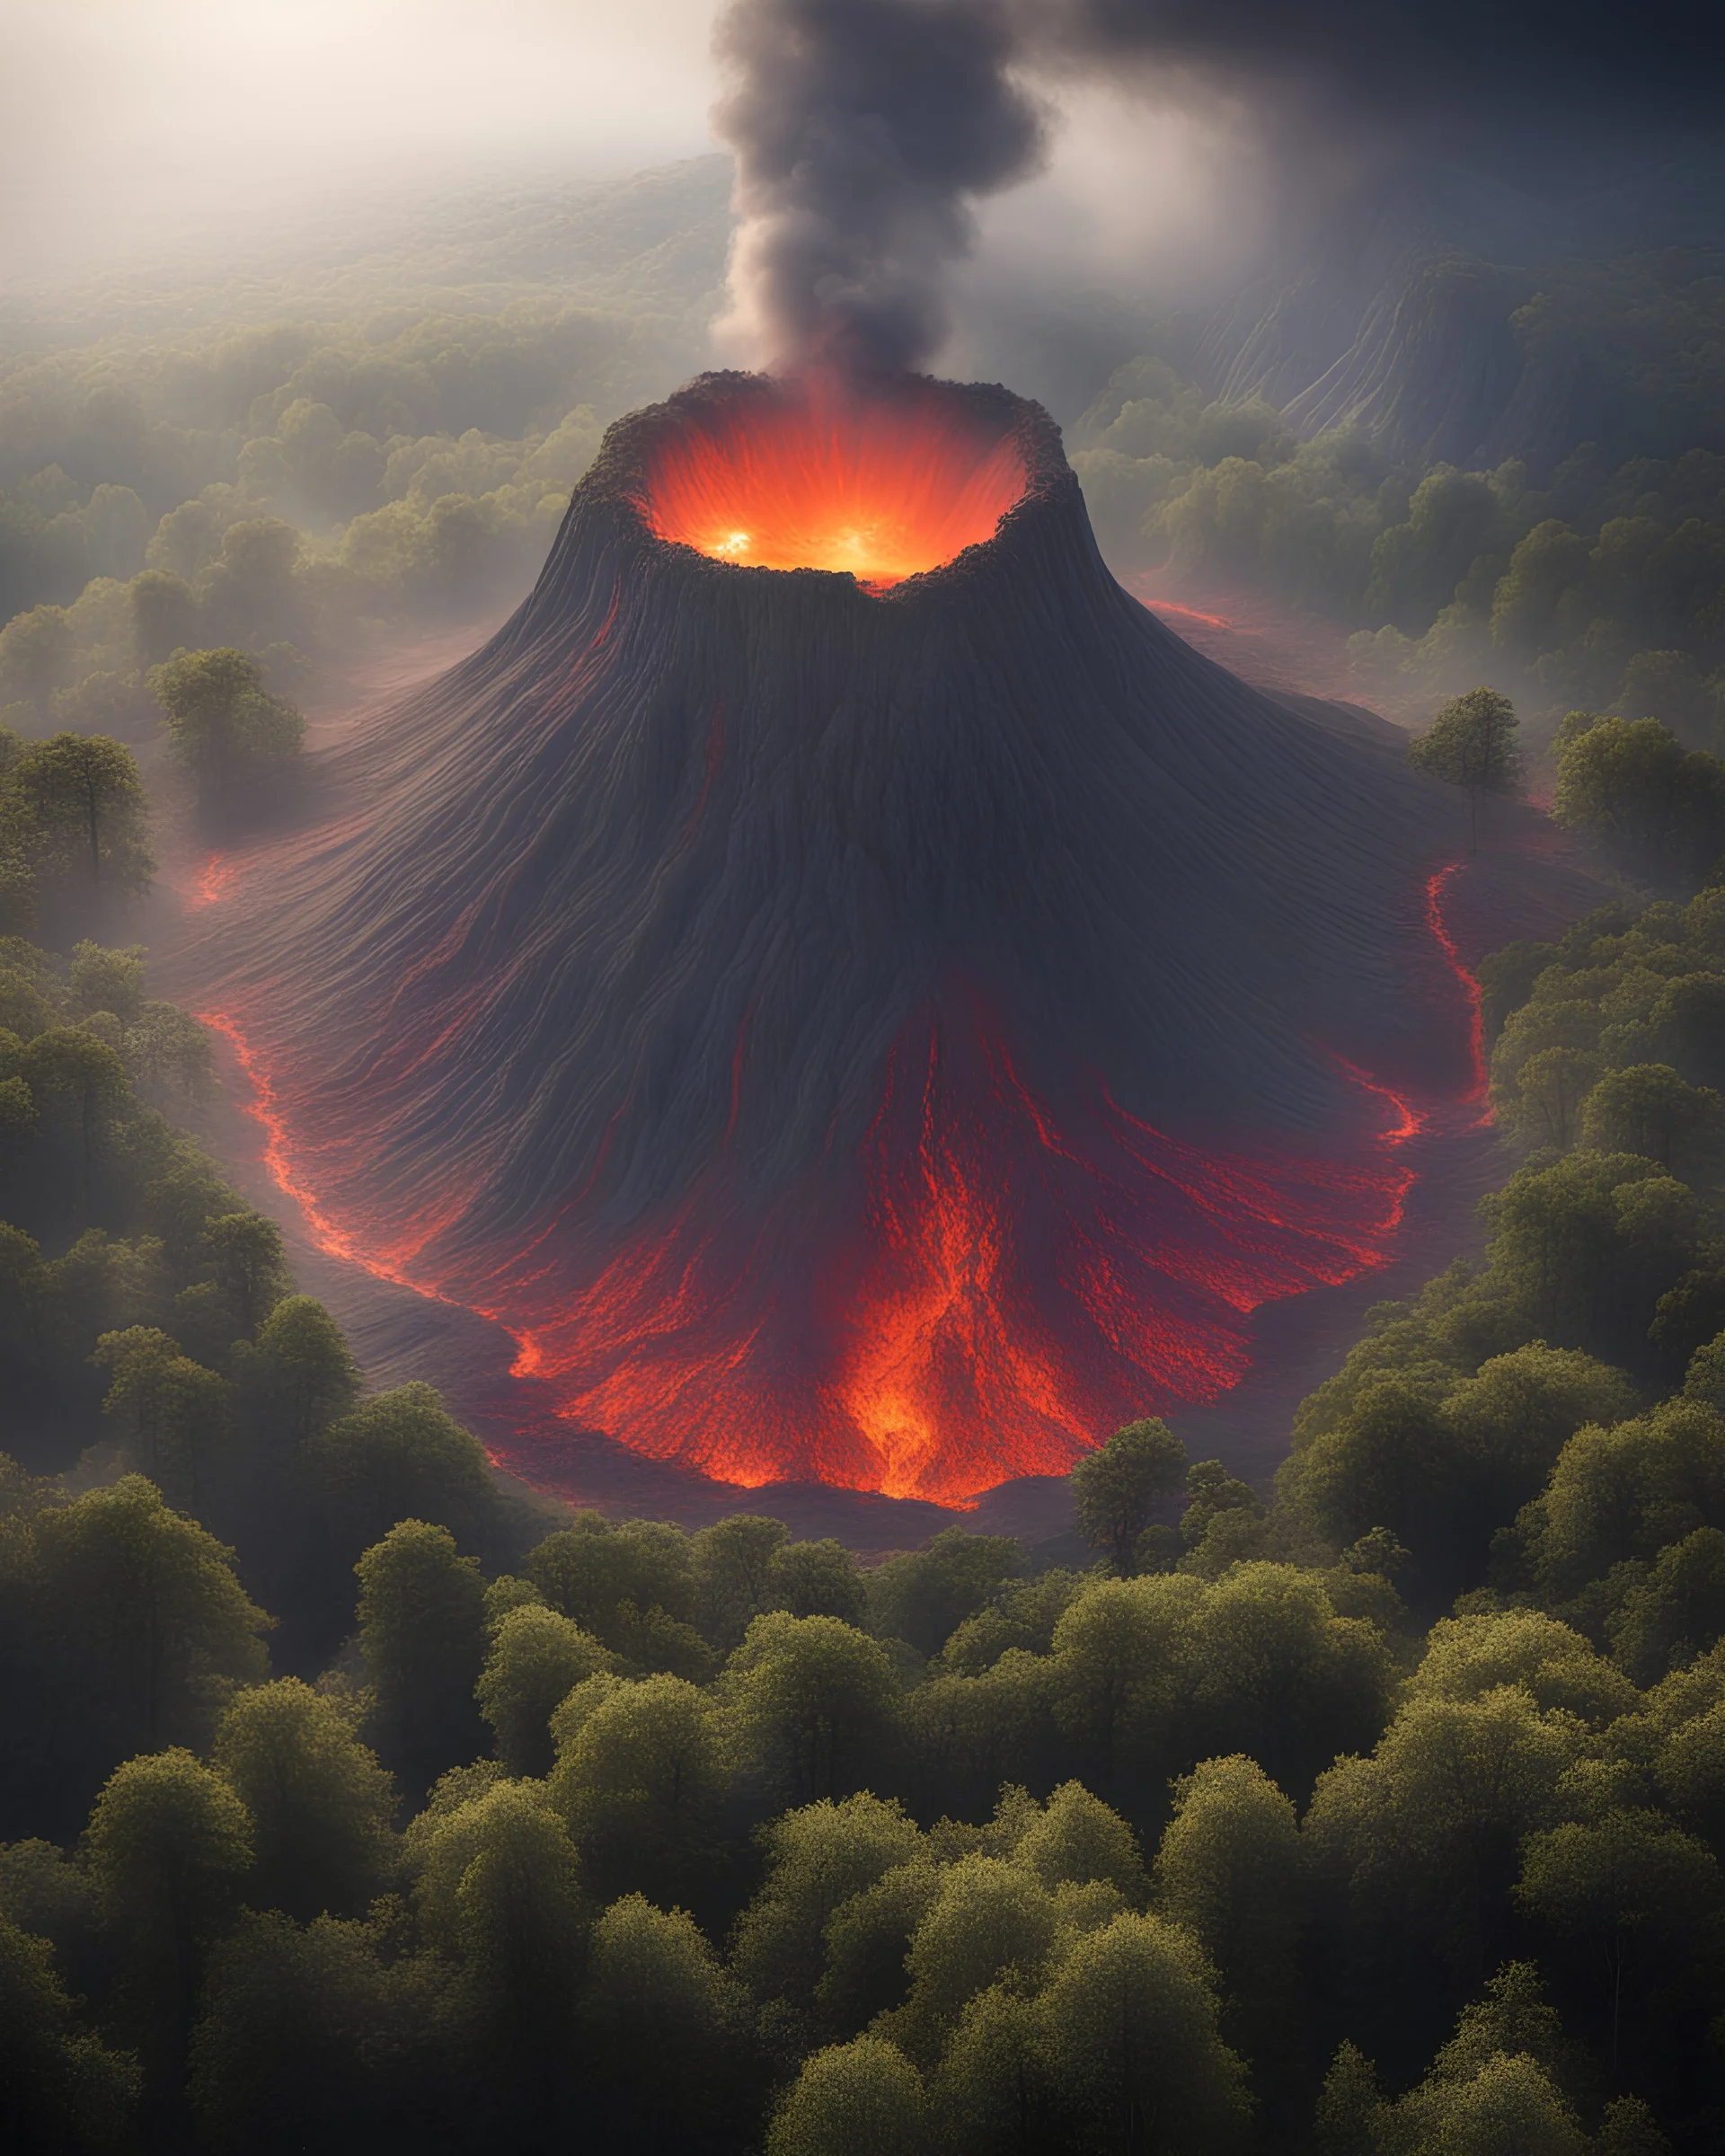 The forest is inside a dormant volcano that erupts when the sun is shining